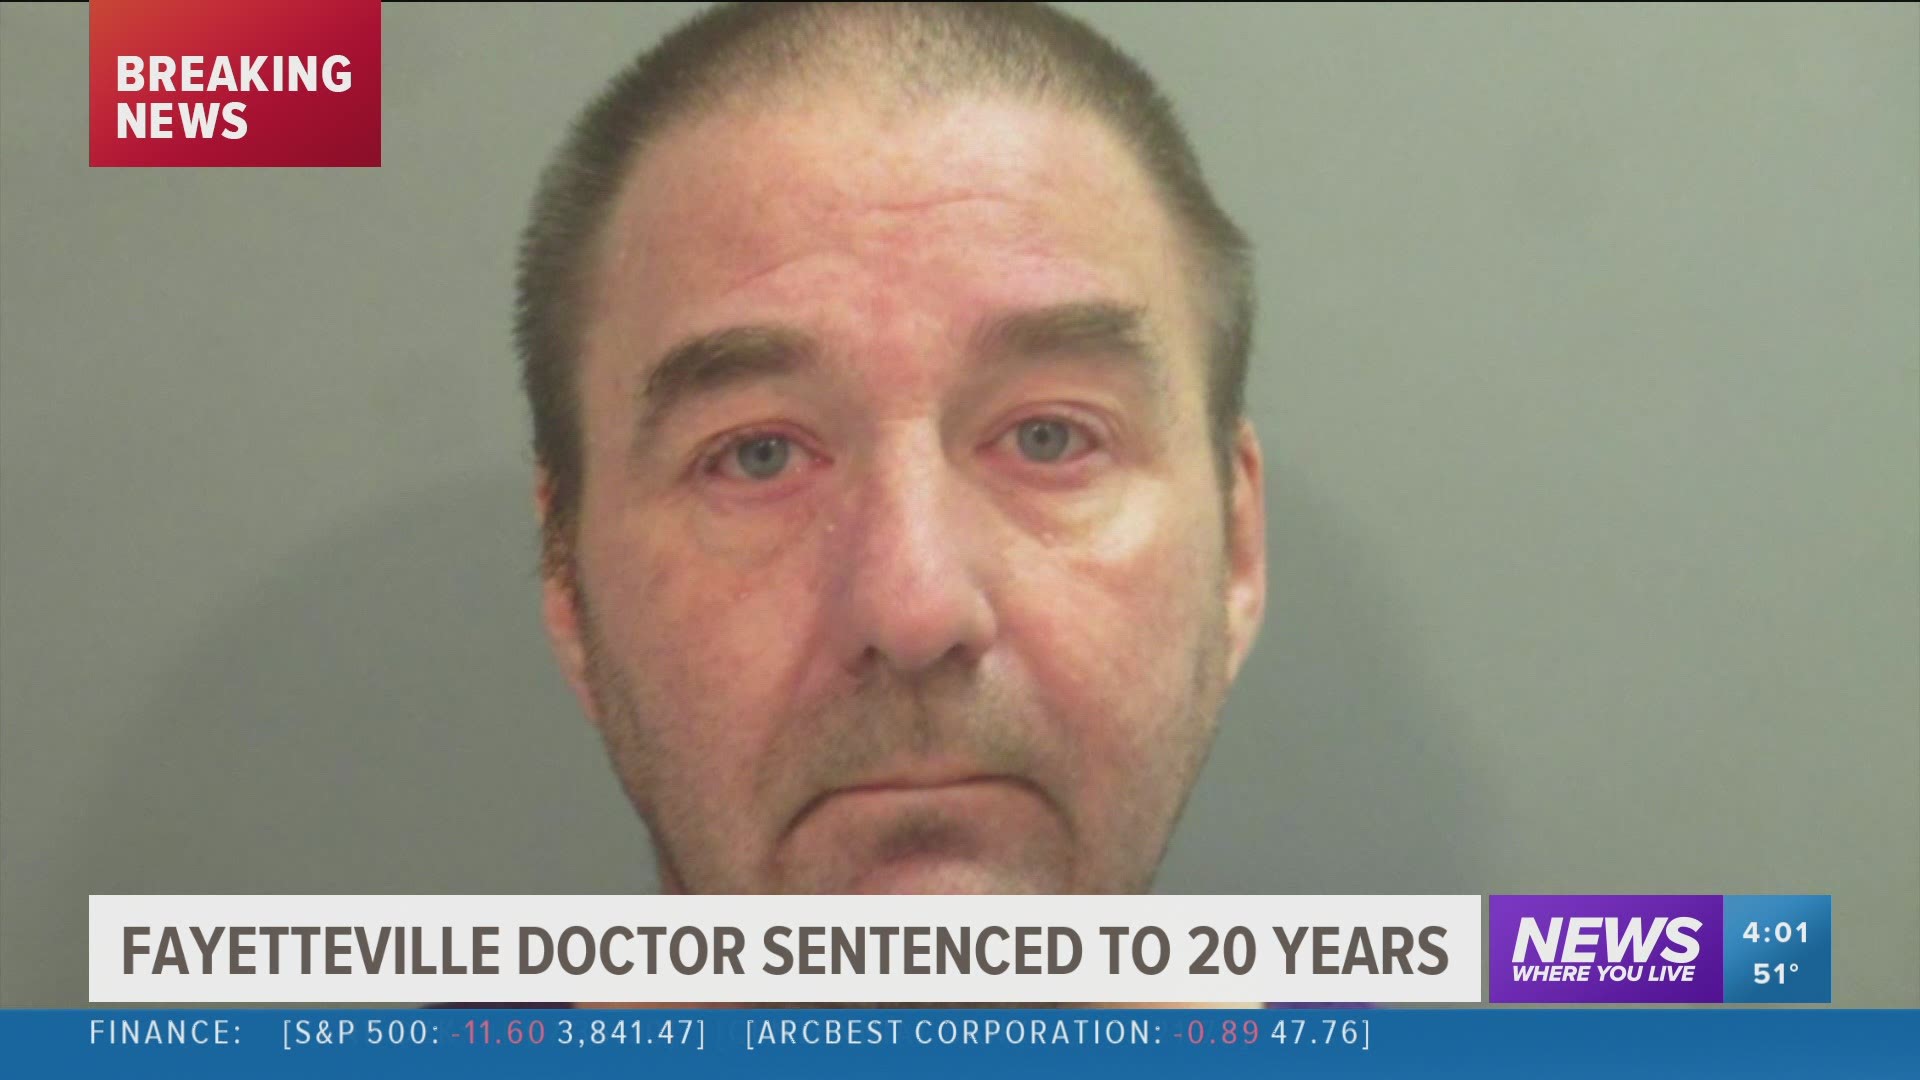 His actions, which included working while impaired, accessing patient records and falsifying diagnoses, led to the deaths of three patients.